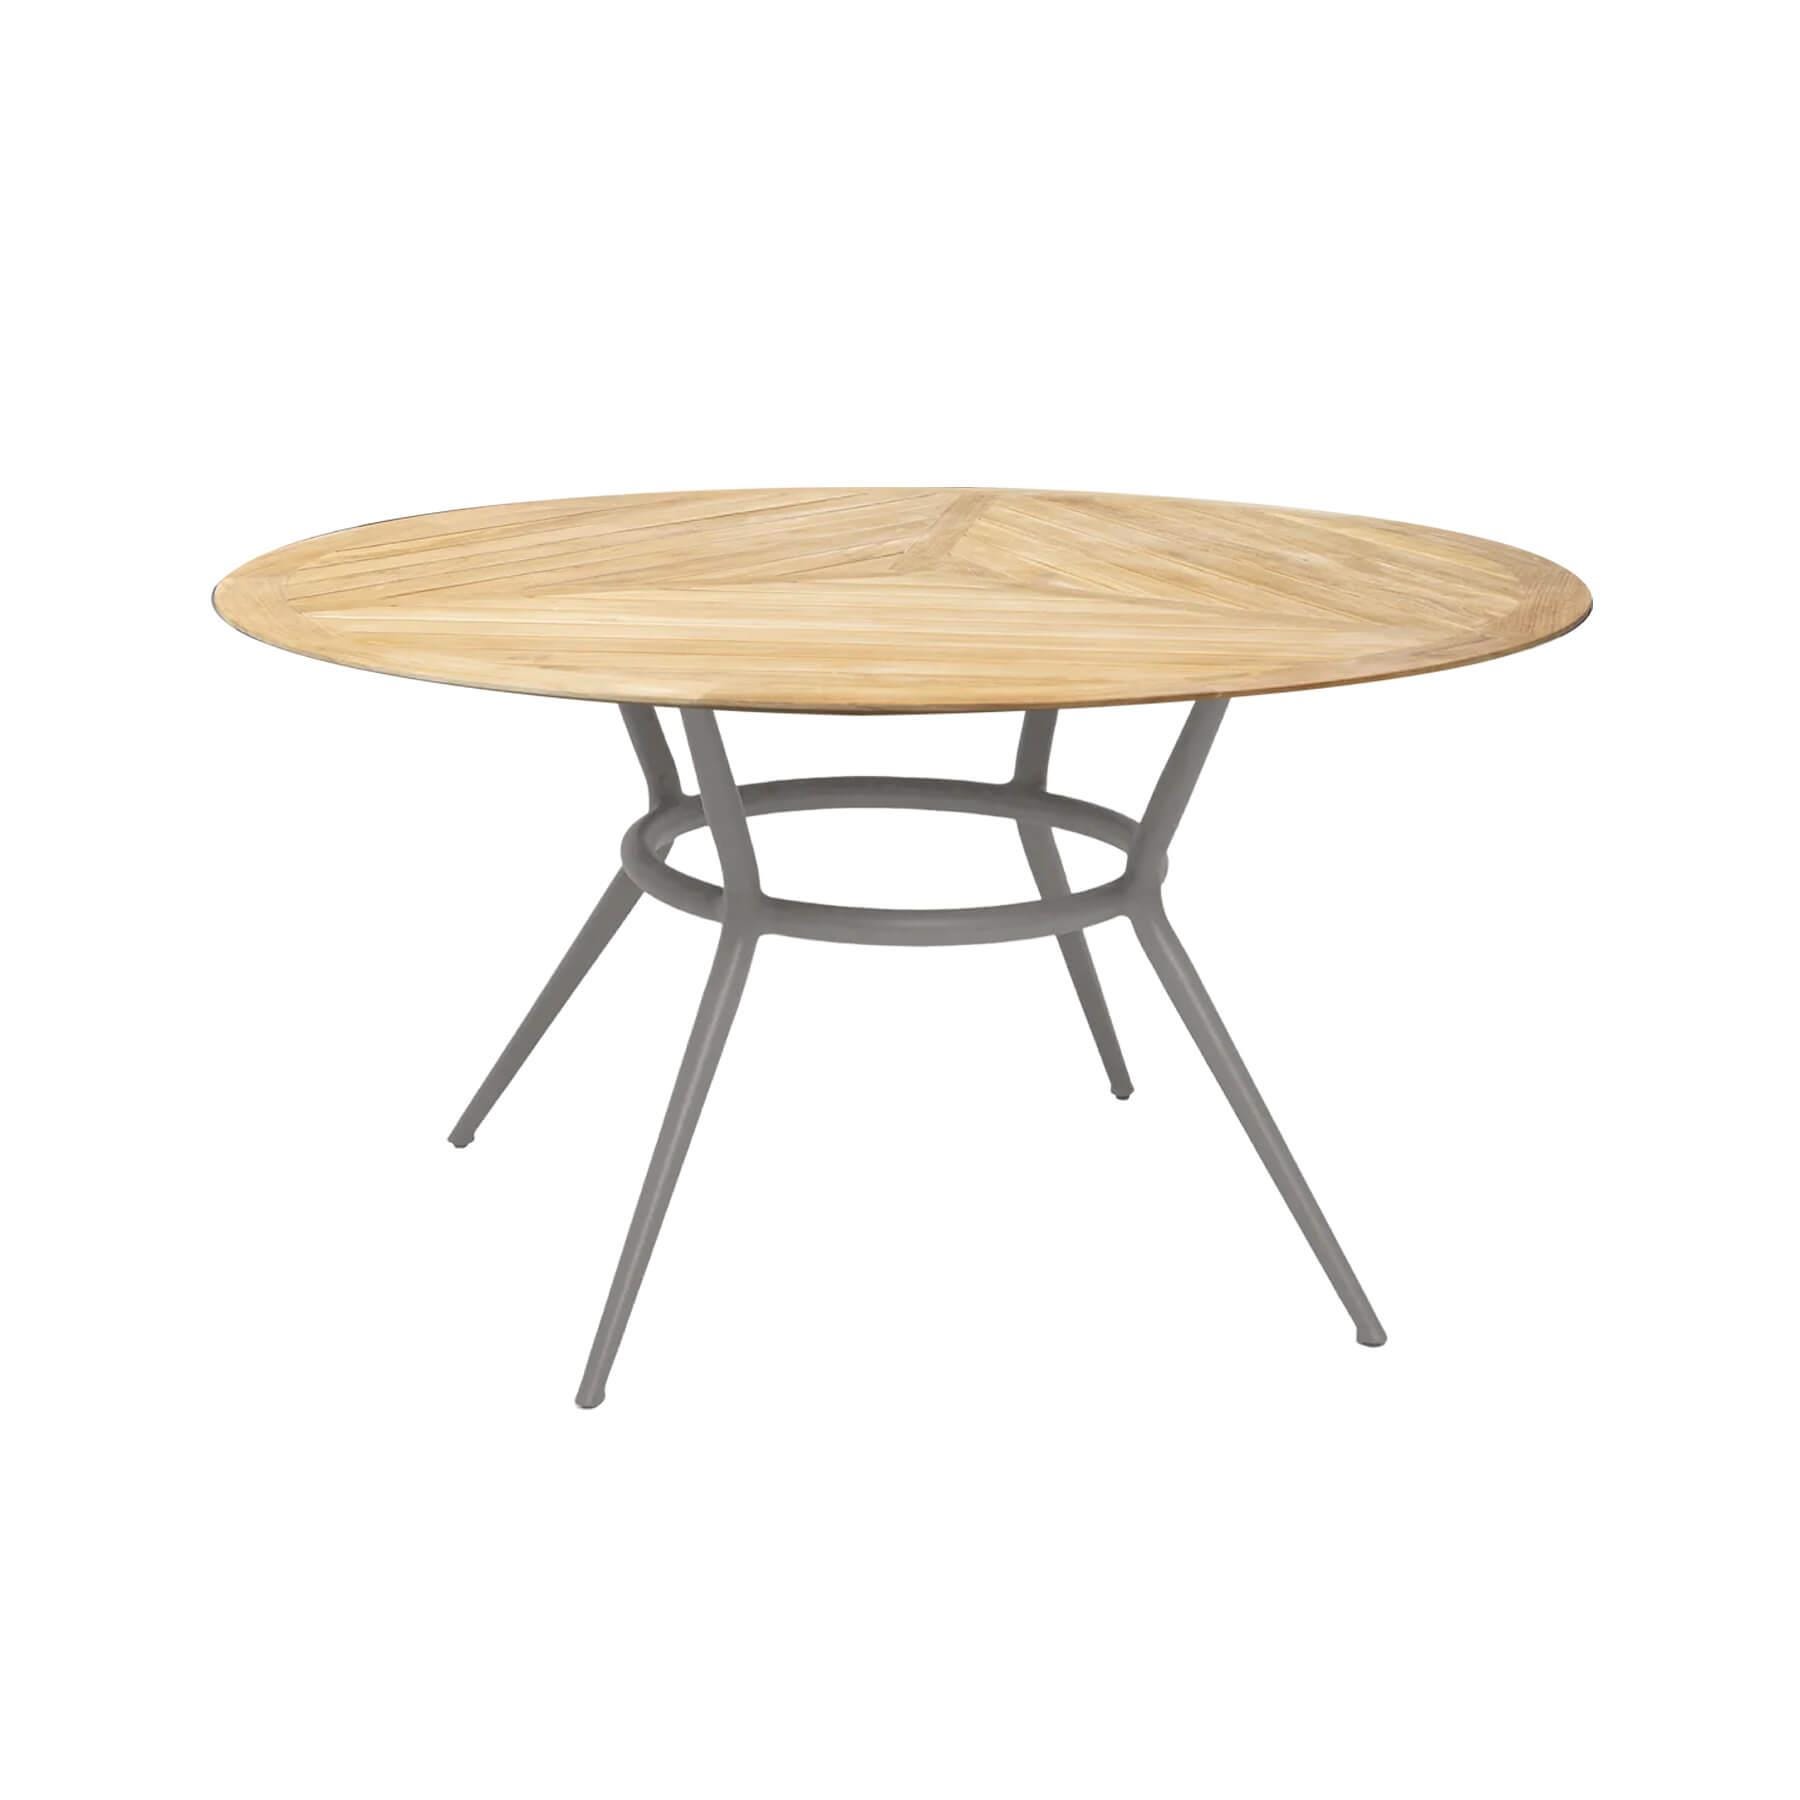 Caneline Joy Outdoor Dining Table Round Teak Top Taupe Legs Light Wood